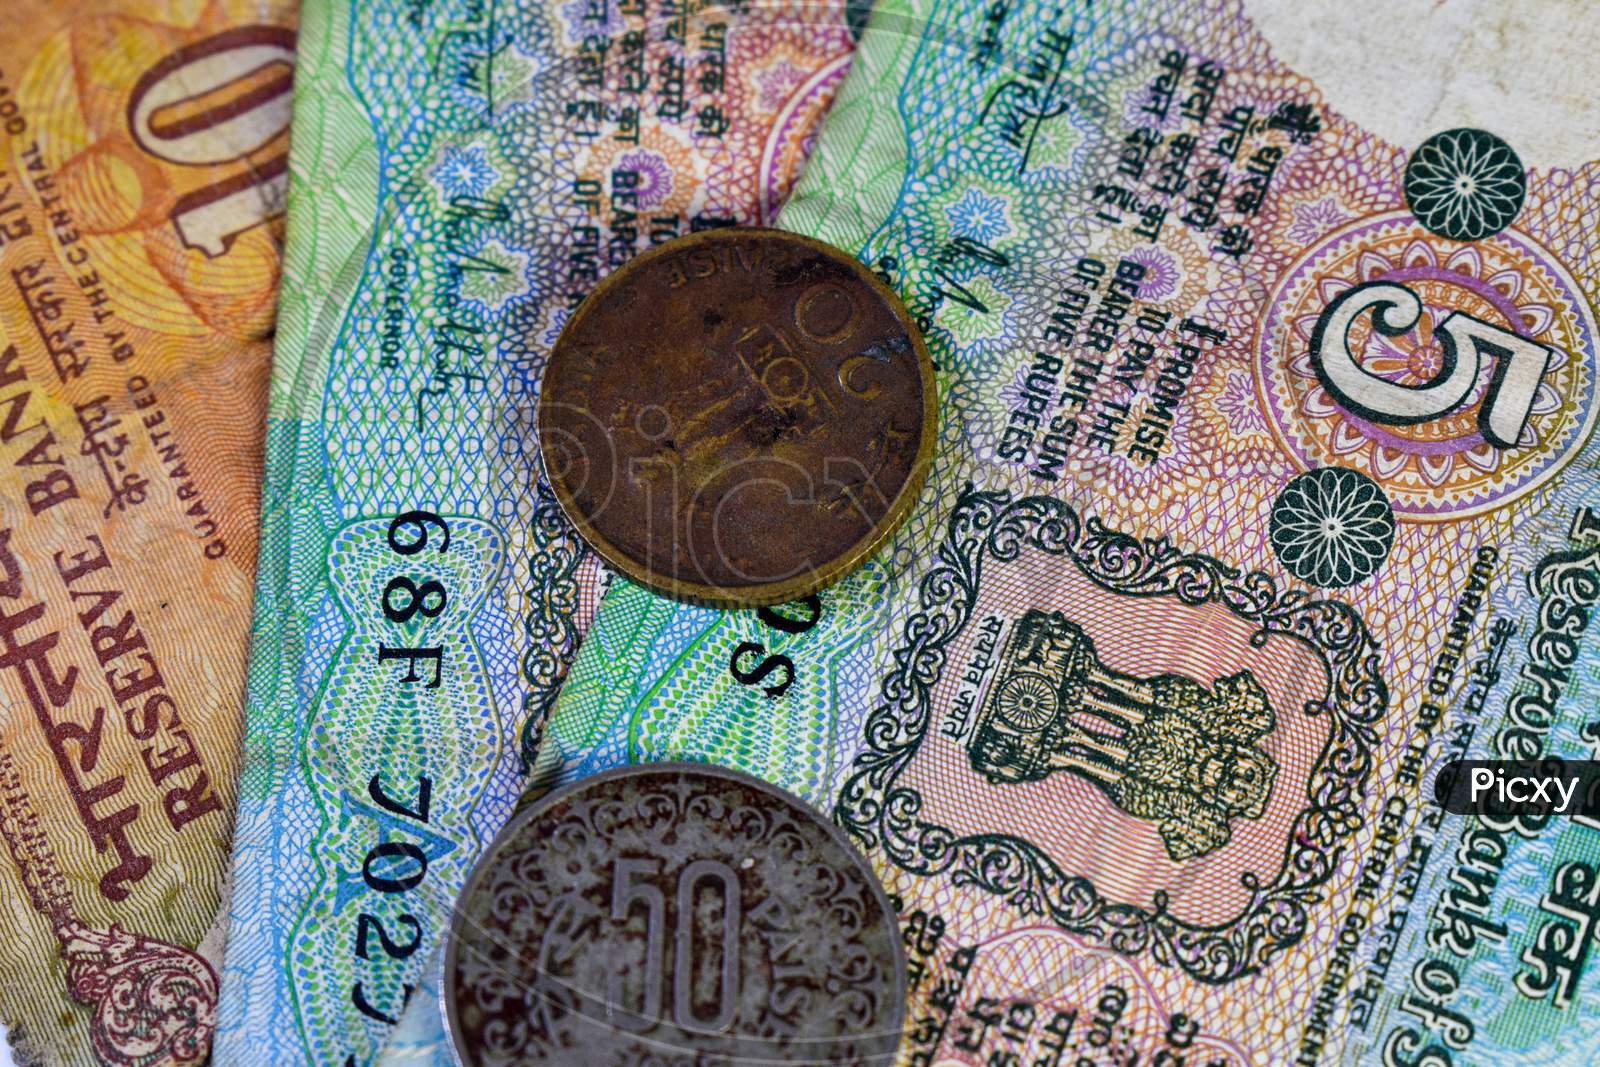 Background Image Of Old Indian Currency Notes And Coins.